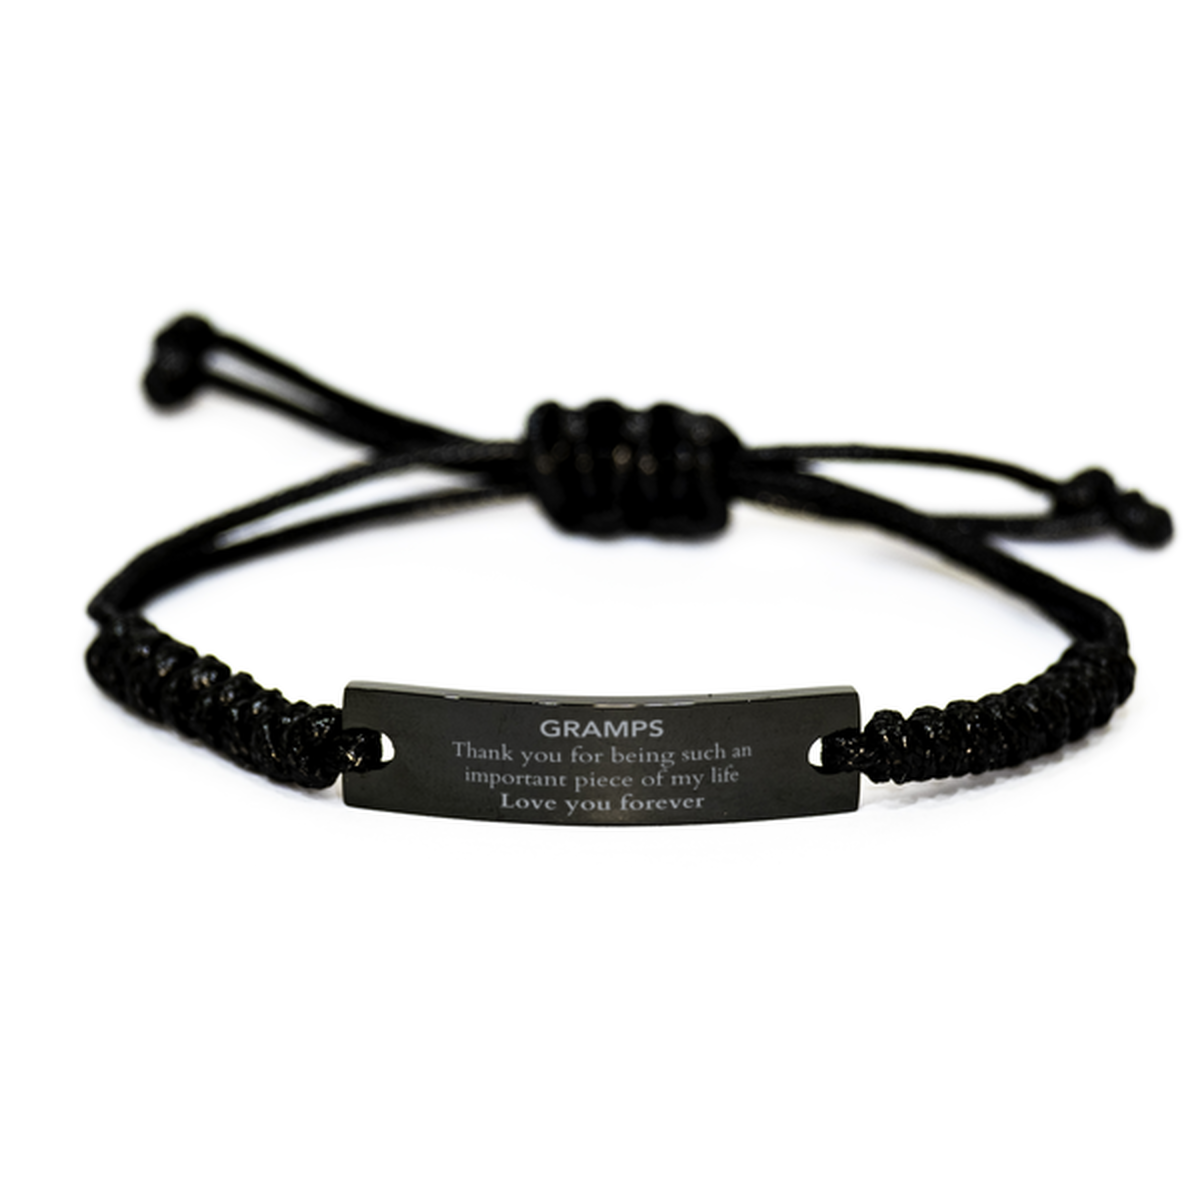 Appropriate Gramps Black Rope Bracelet Epic Birthday Gifts for Gramps Thank you for being such an important piece of my life Gramps Christmas Mothers Fathers Day